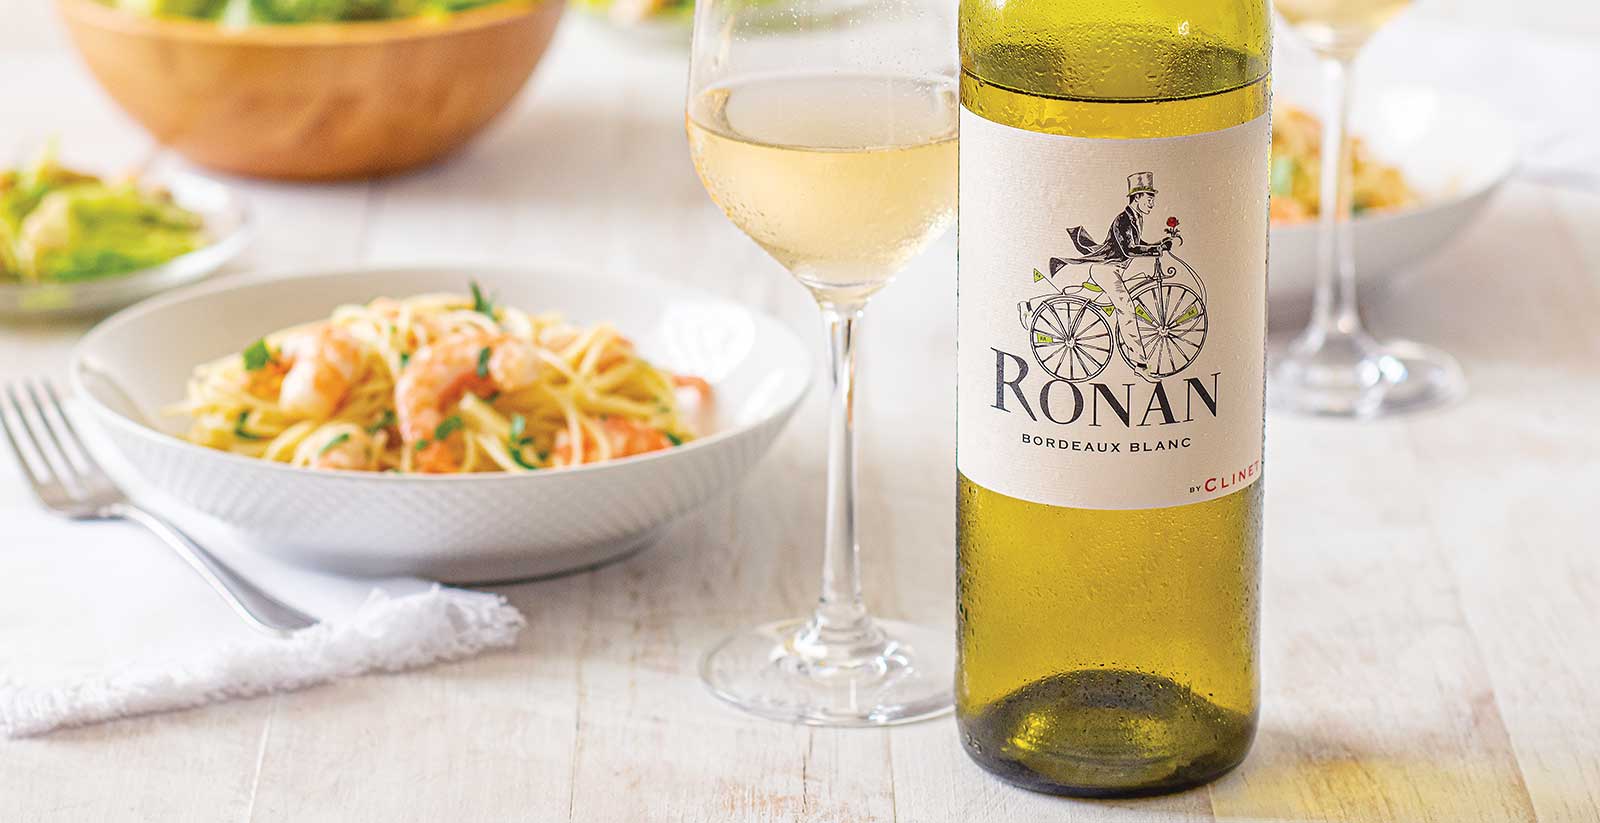 Ronan by Clinet White Bordeaux paired with Shrimp Scampi over angel hair pasta paired with Amore Caesar Salad